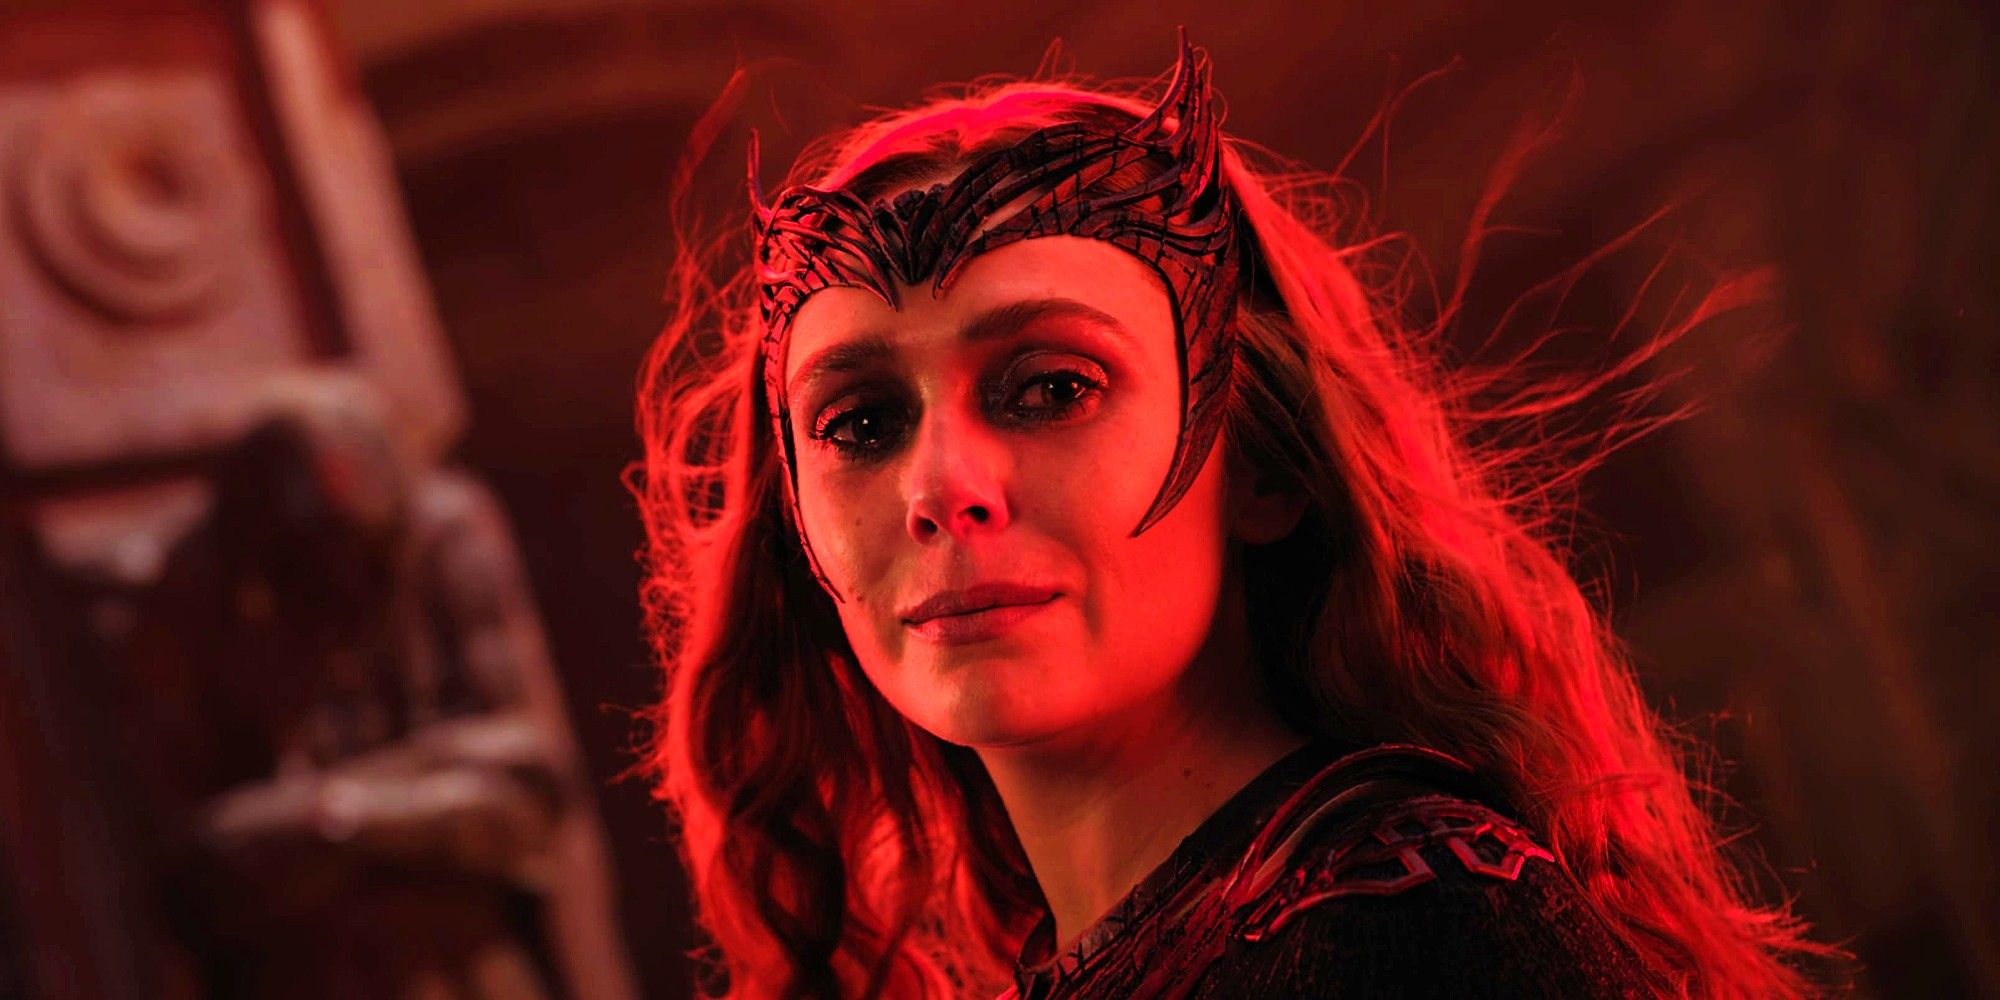 Elizabeth Olsen as Scarlet Witch Looking Distraught in Doctor Strange in the Multiverse of Madness